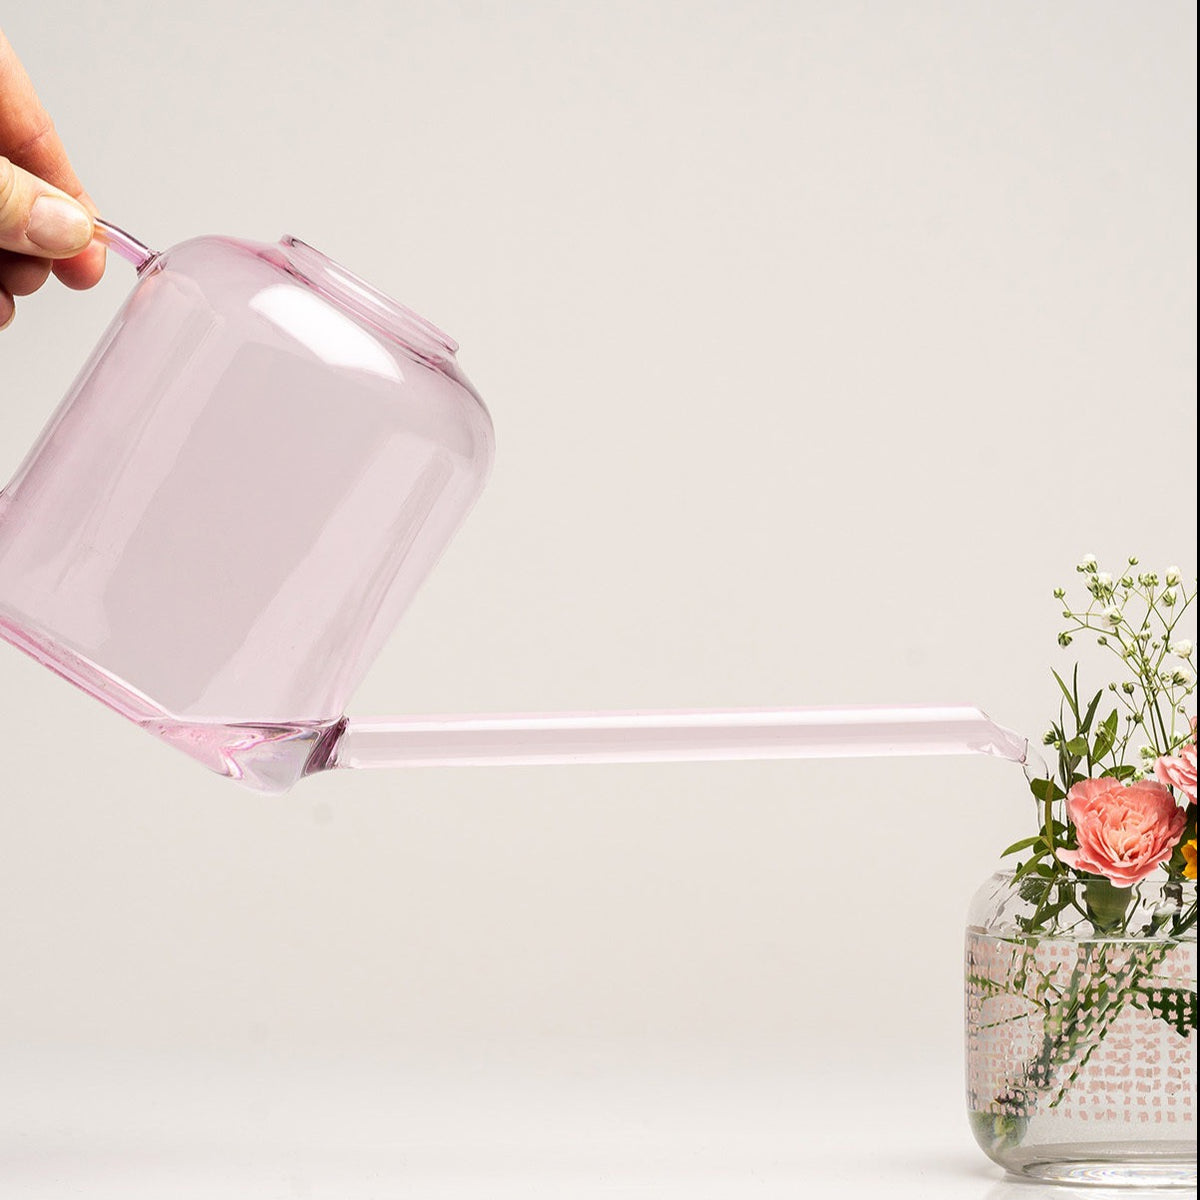 Water being poured from a Muurla Design Pink Watering Can 0.8L